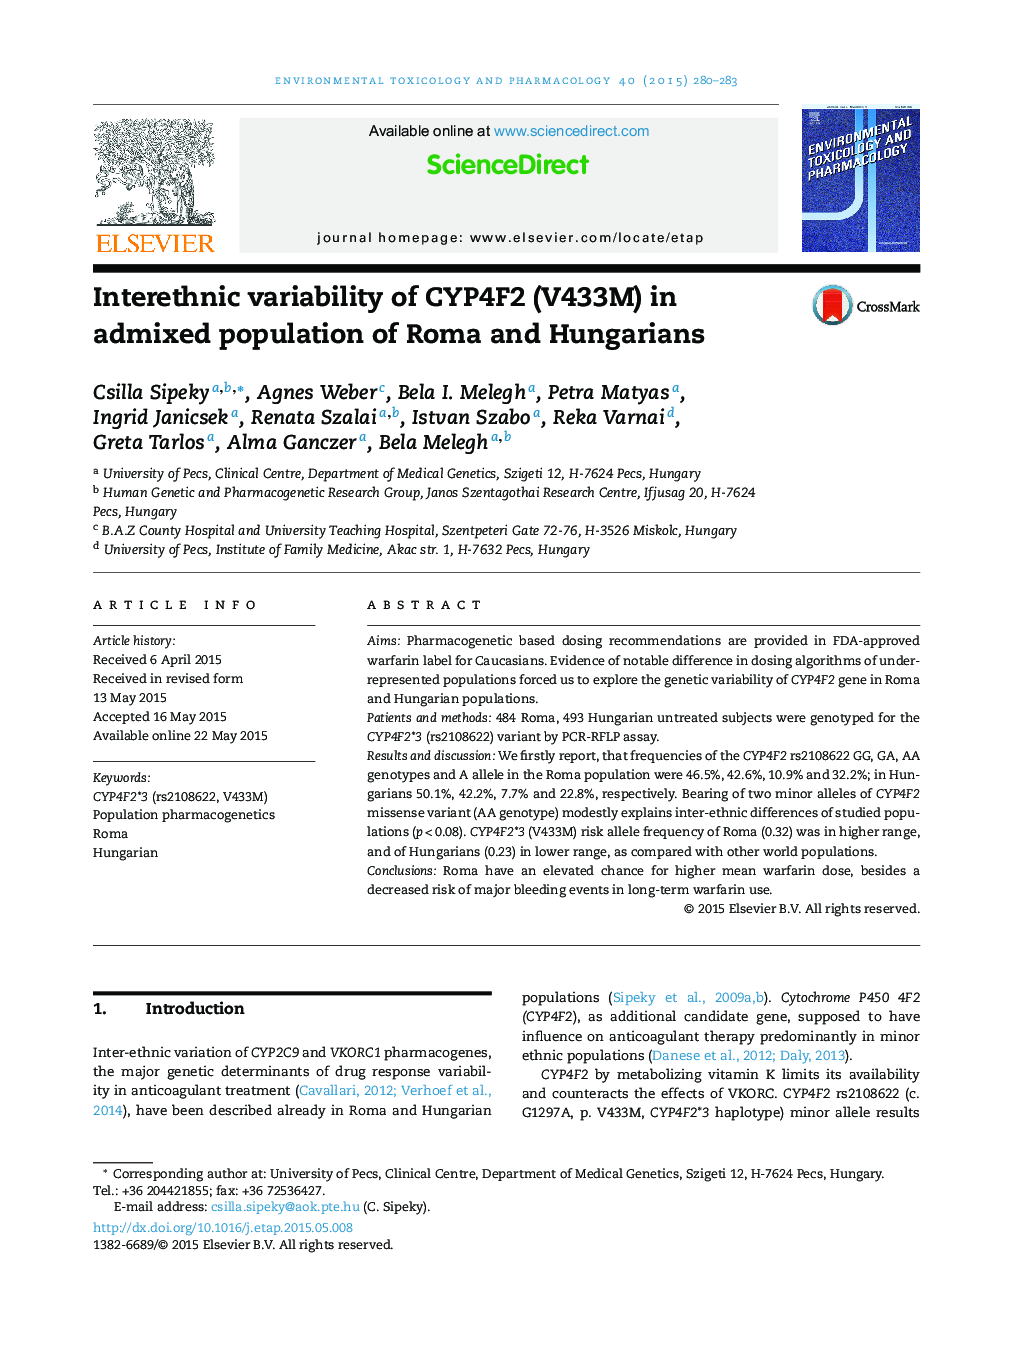 Interethnic variability of CYP4F2 (V433M) in admixed population of Roma and Hungarians